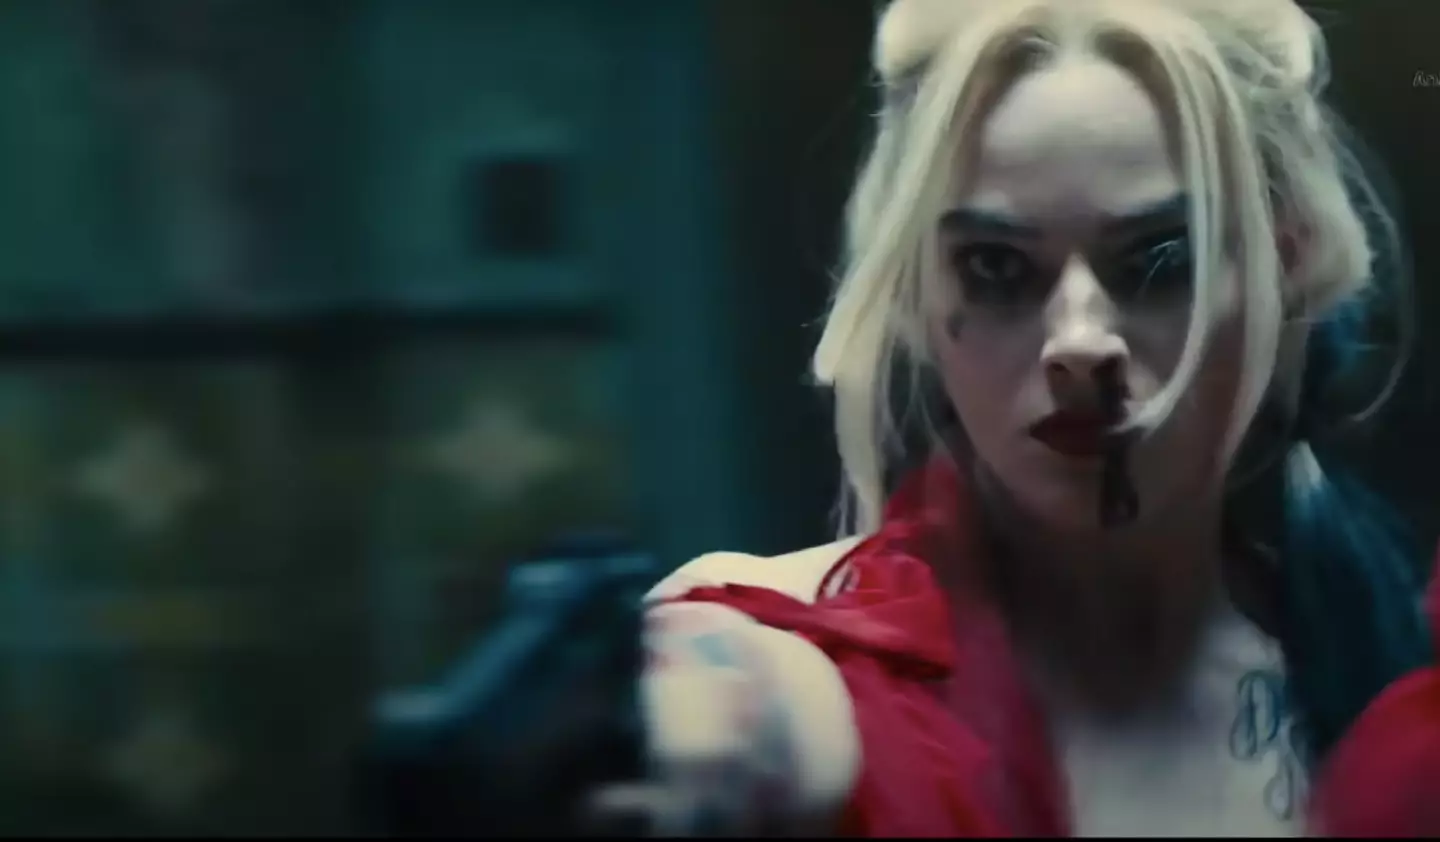 Harley Quinn has been a breakout star of the Suicide Squad films (